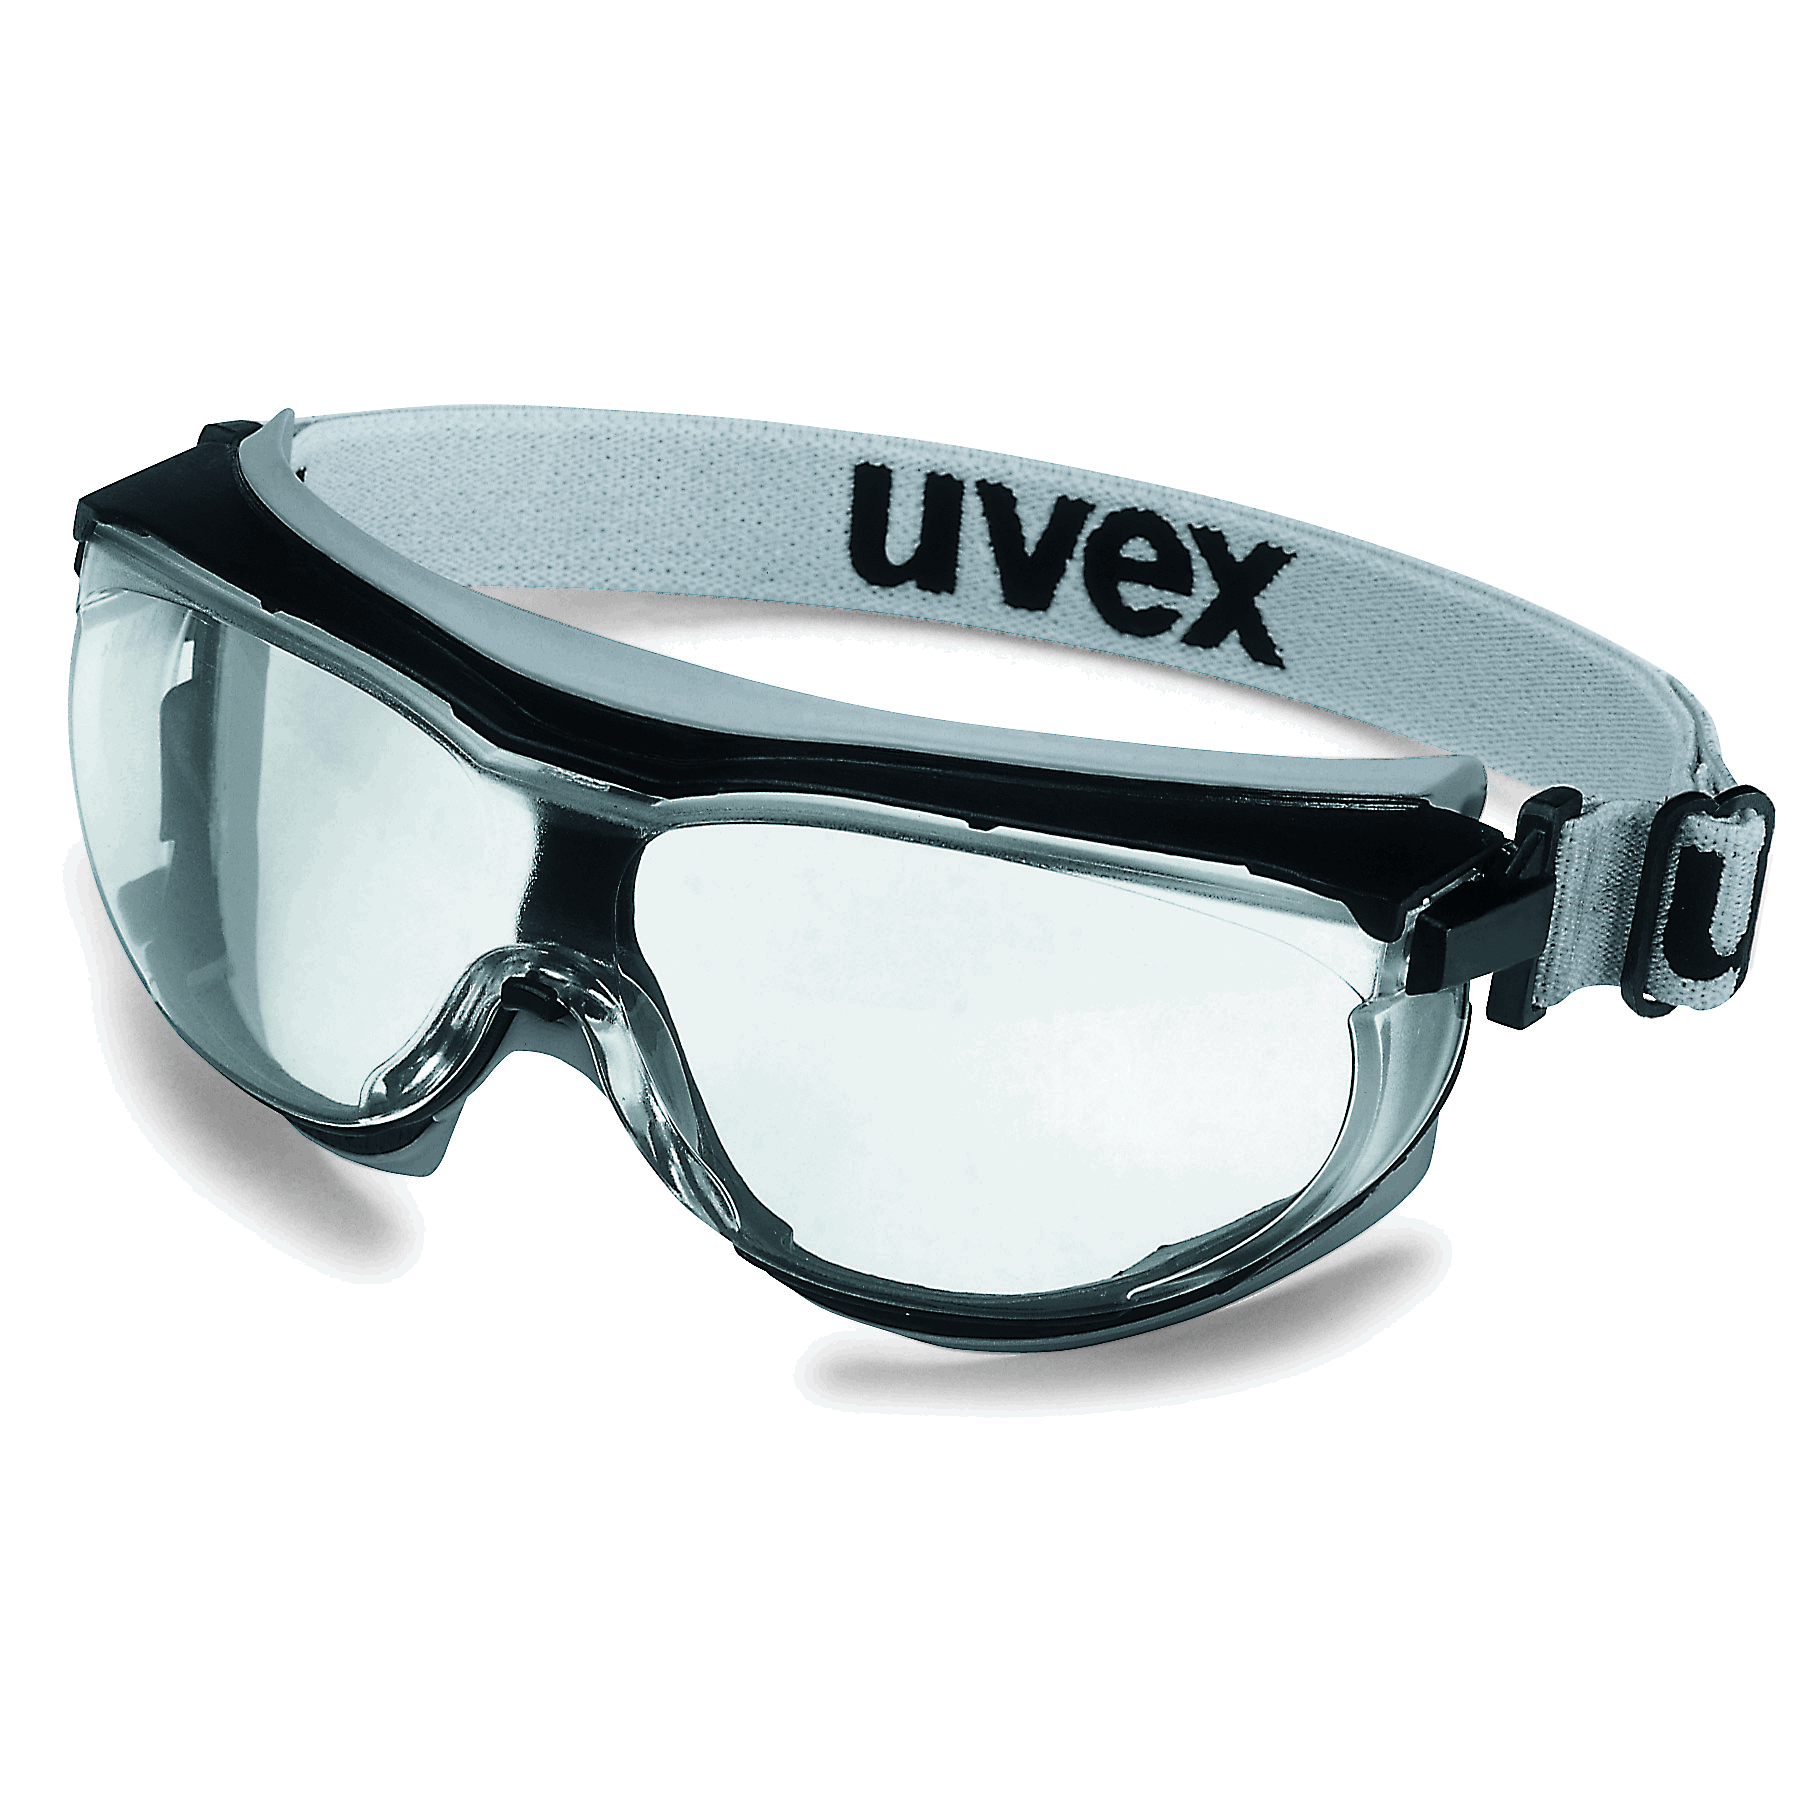 GOGGLE CARBONVISION CLEAR -THS LENS CAT 0